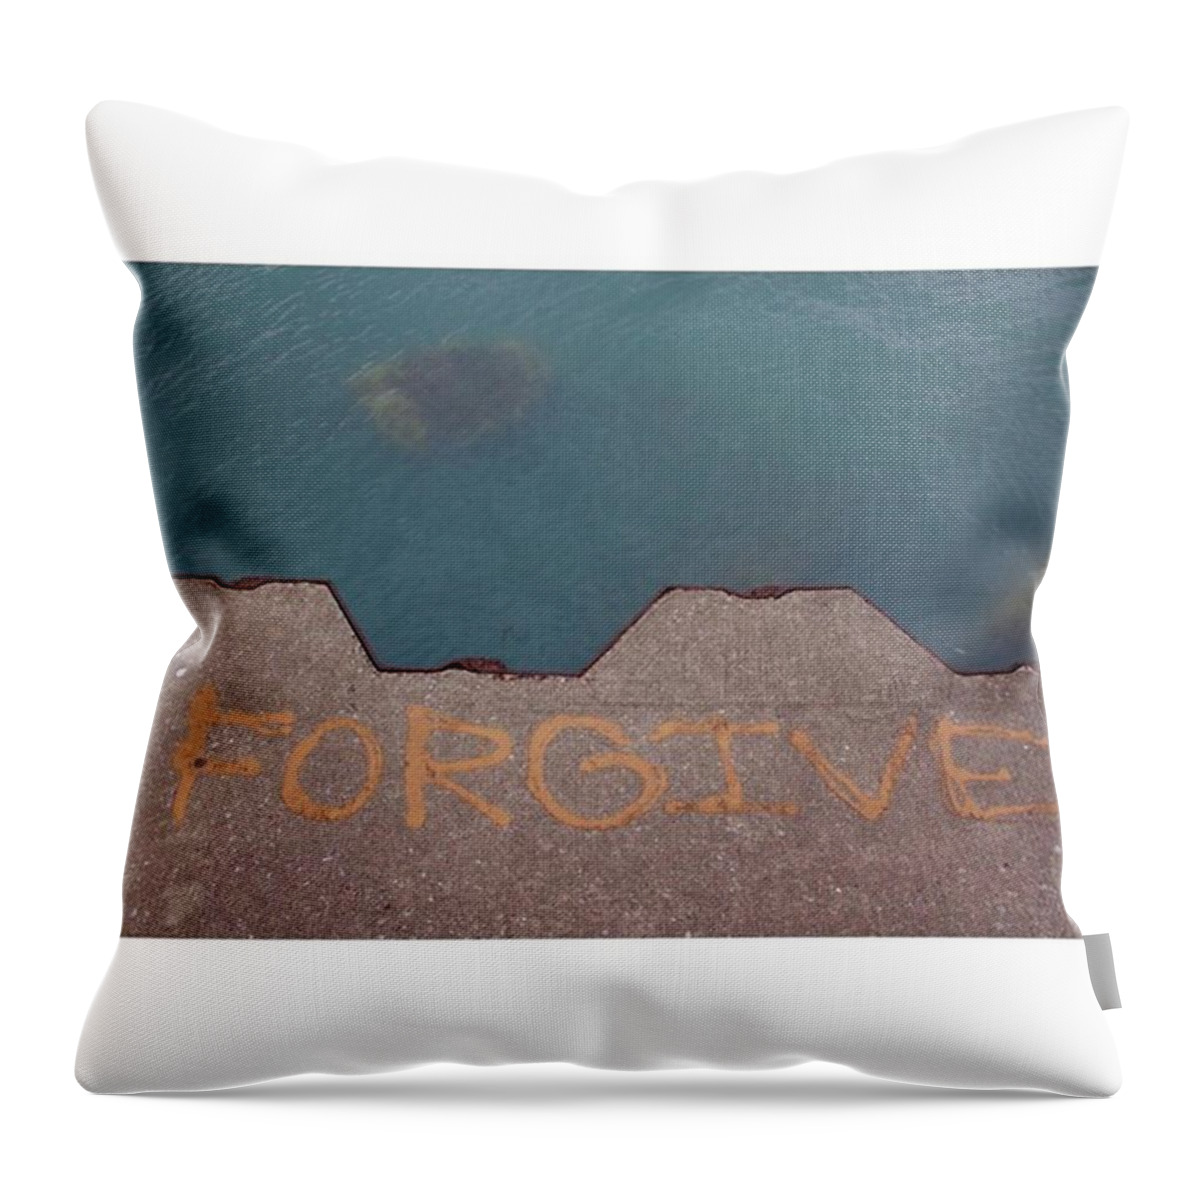 Canonrebel Throw Pillow featuring the photograph Forgive by Whitney Golden